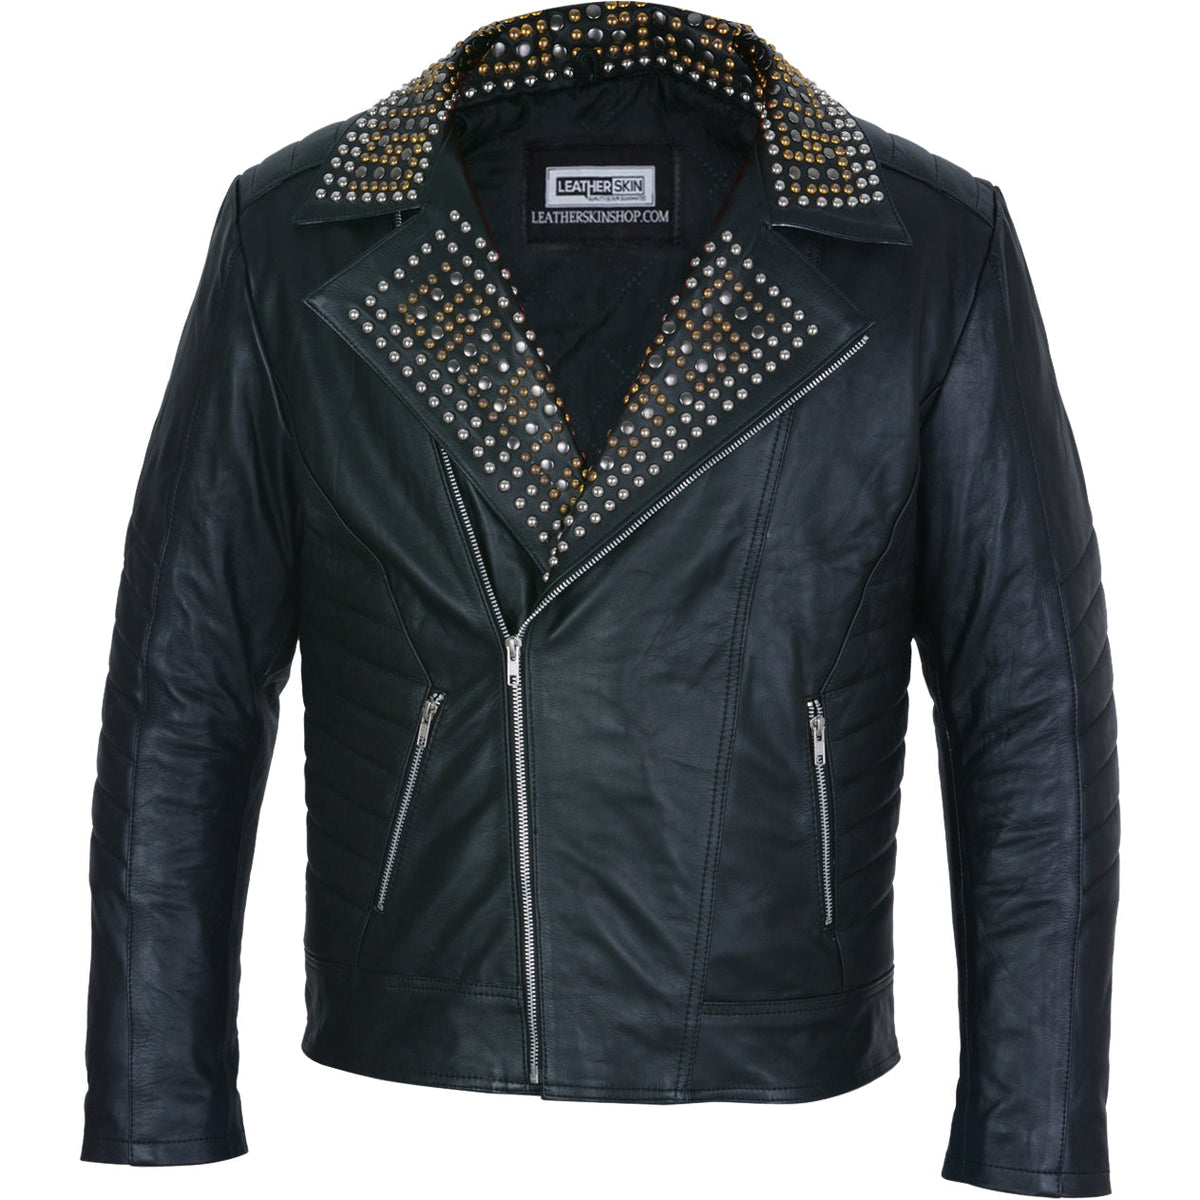 Black Punk Leather Jacket with Spikes Decor - Leather Skin Shop